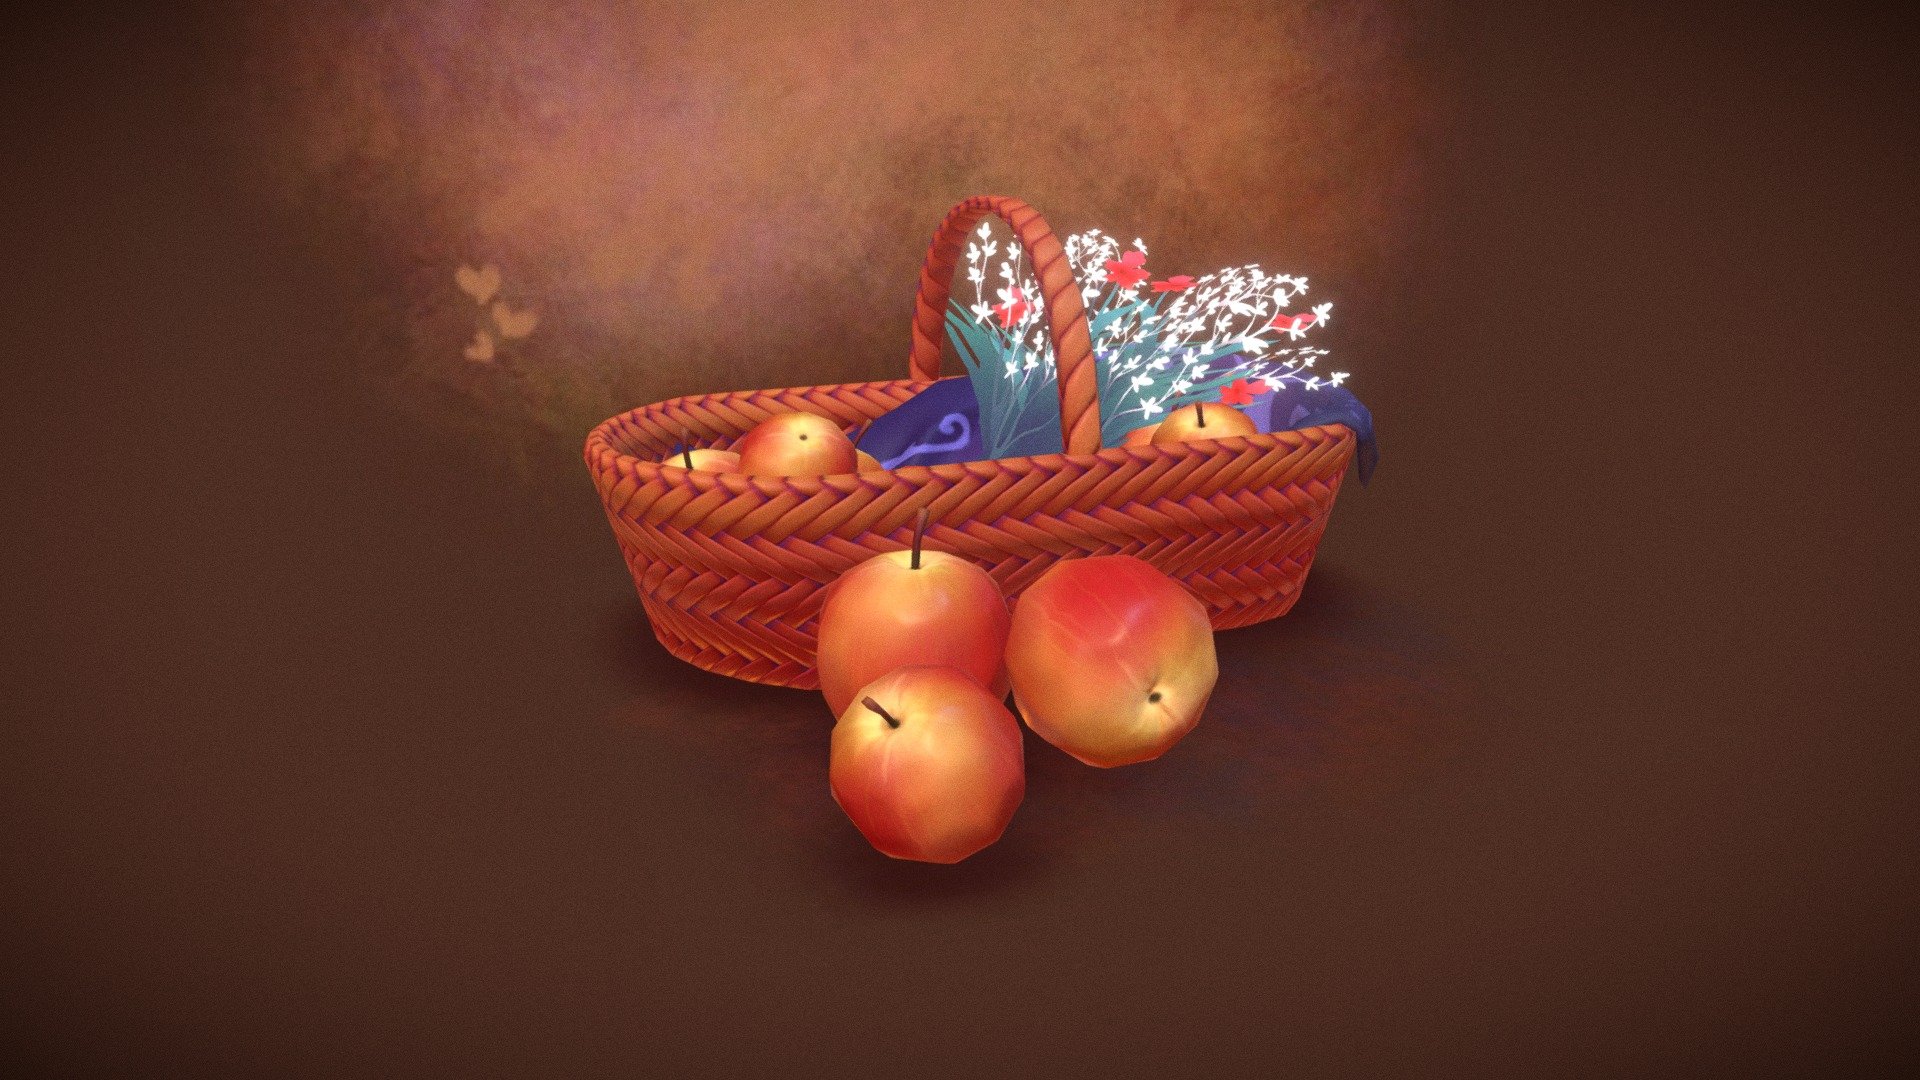 There was supposed to be bread in there, but I never got around to it. I had to fill up empty texture space with something else&hellip; sooo&hellip; let's say these are fresh flowers for the Alchemist? - Apples - 3D model by Billie (@billiestray) 3d model